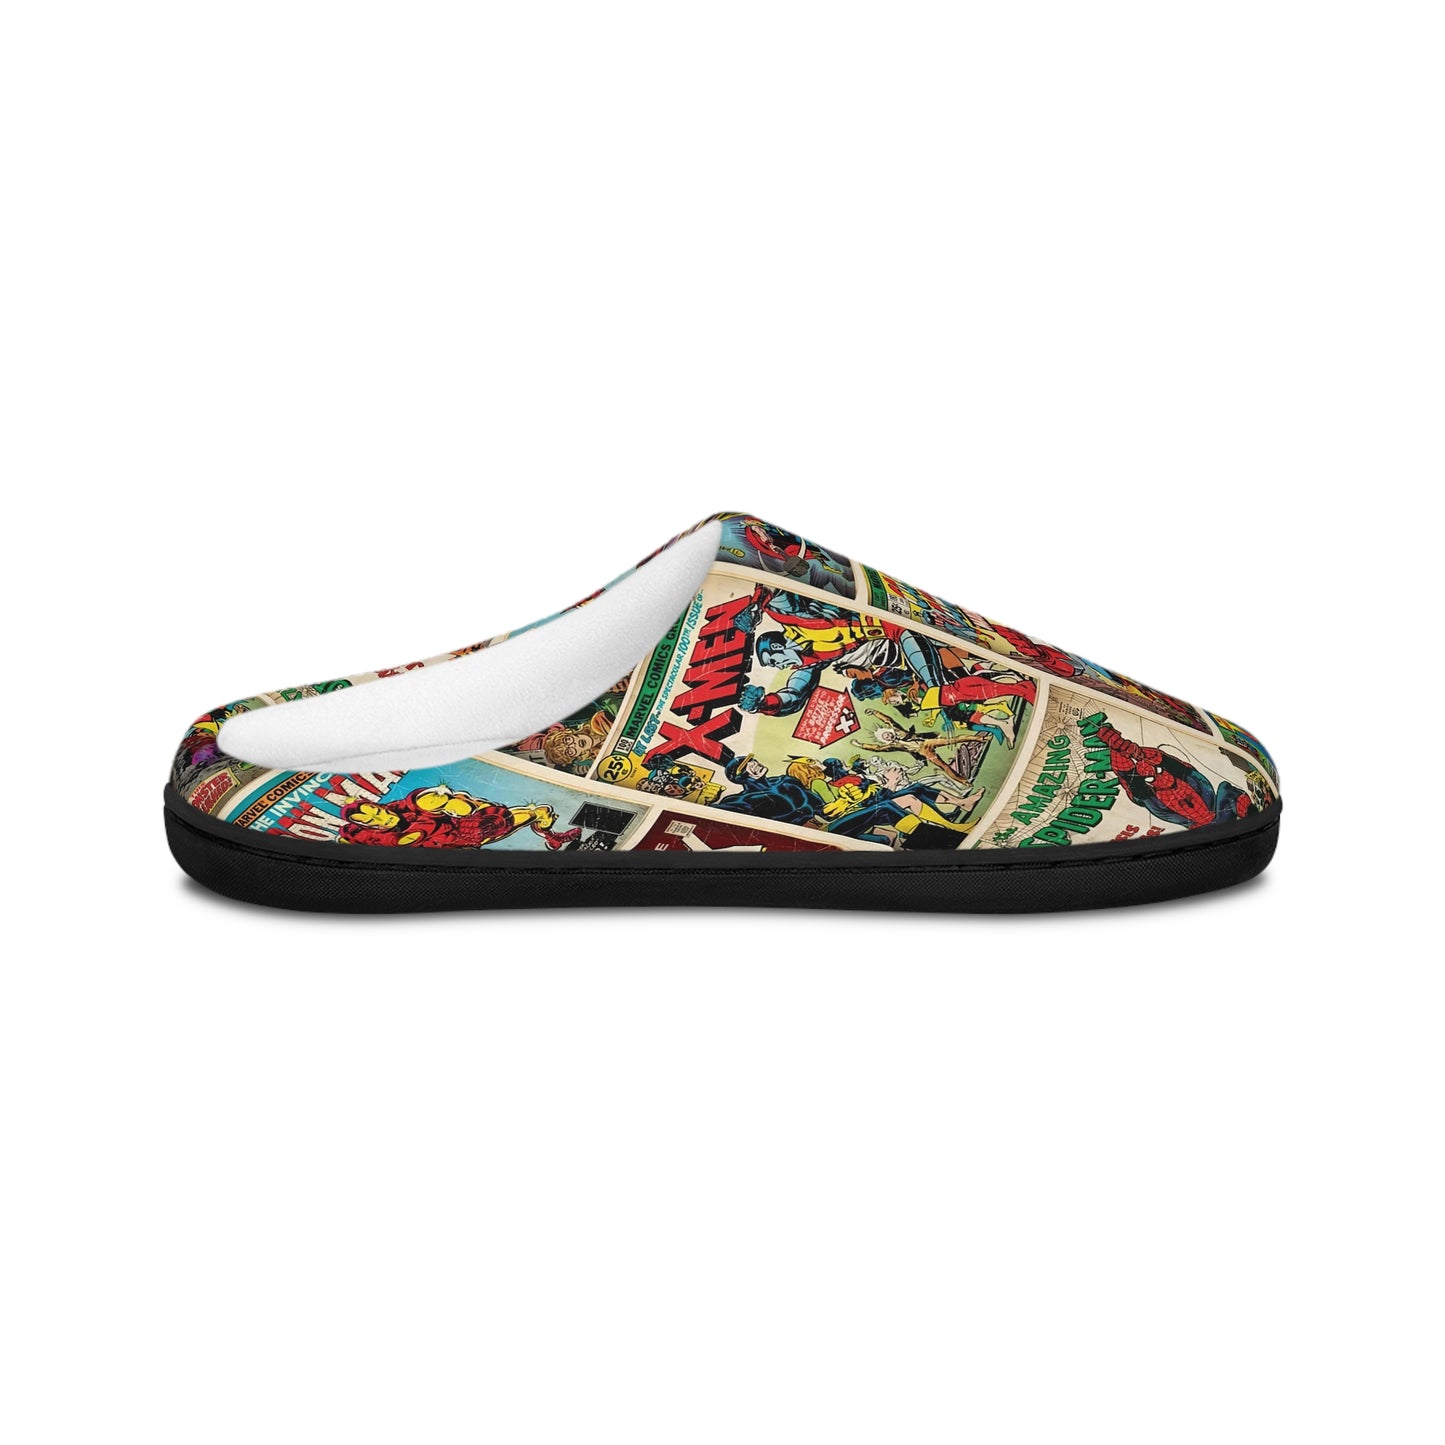 Marvel Comic Book Cover Collage Women's Indoor Slippers